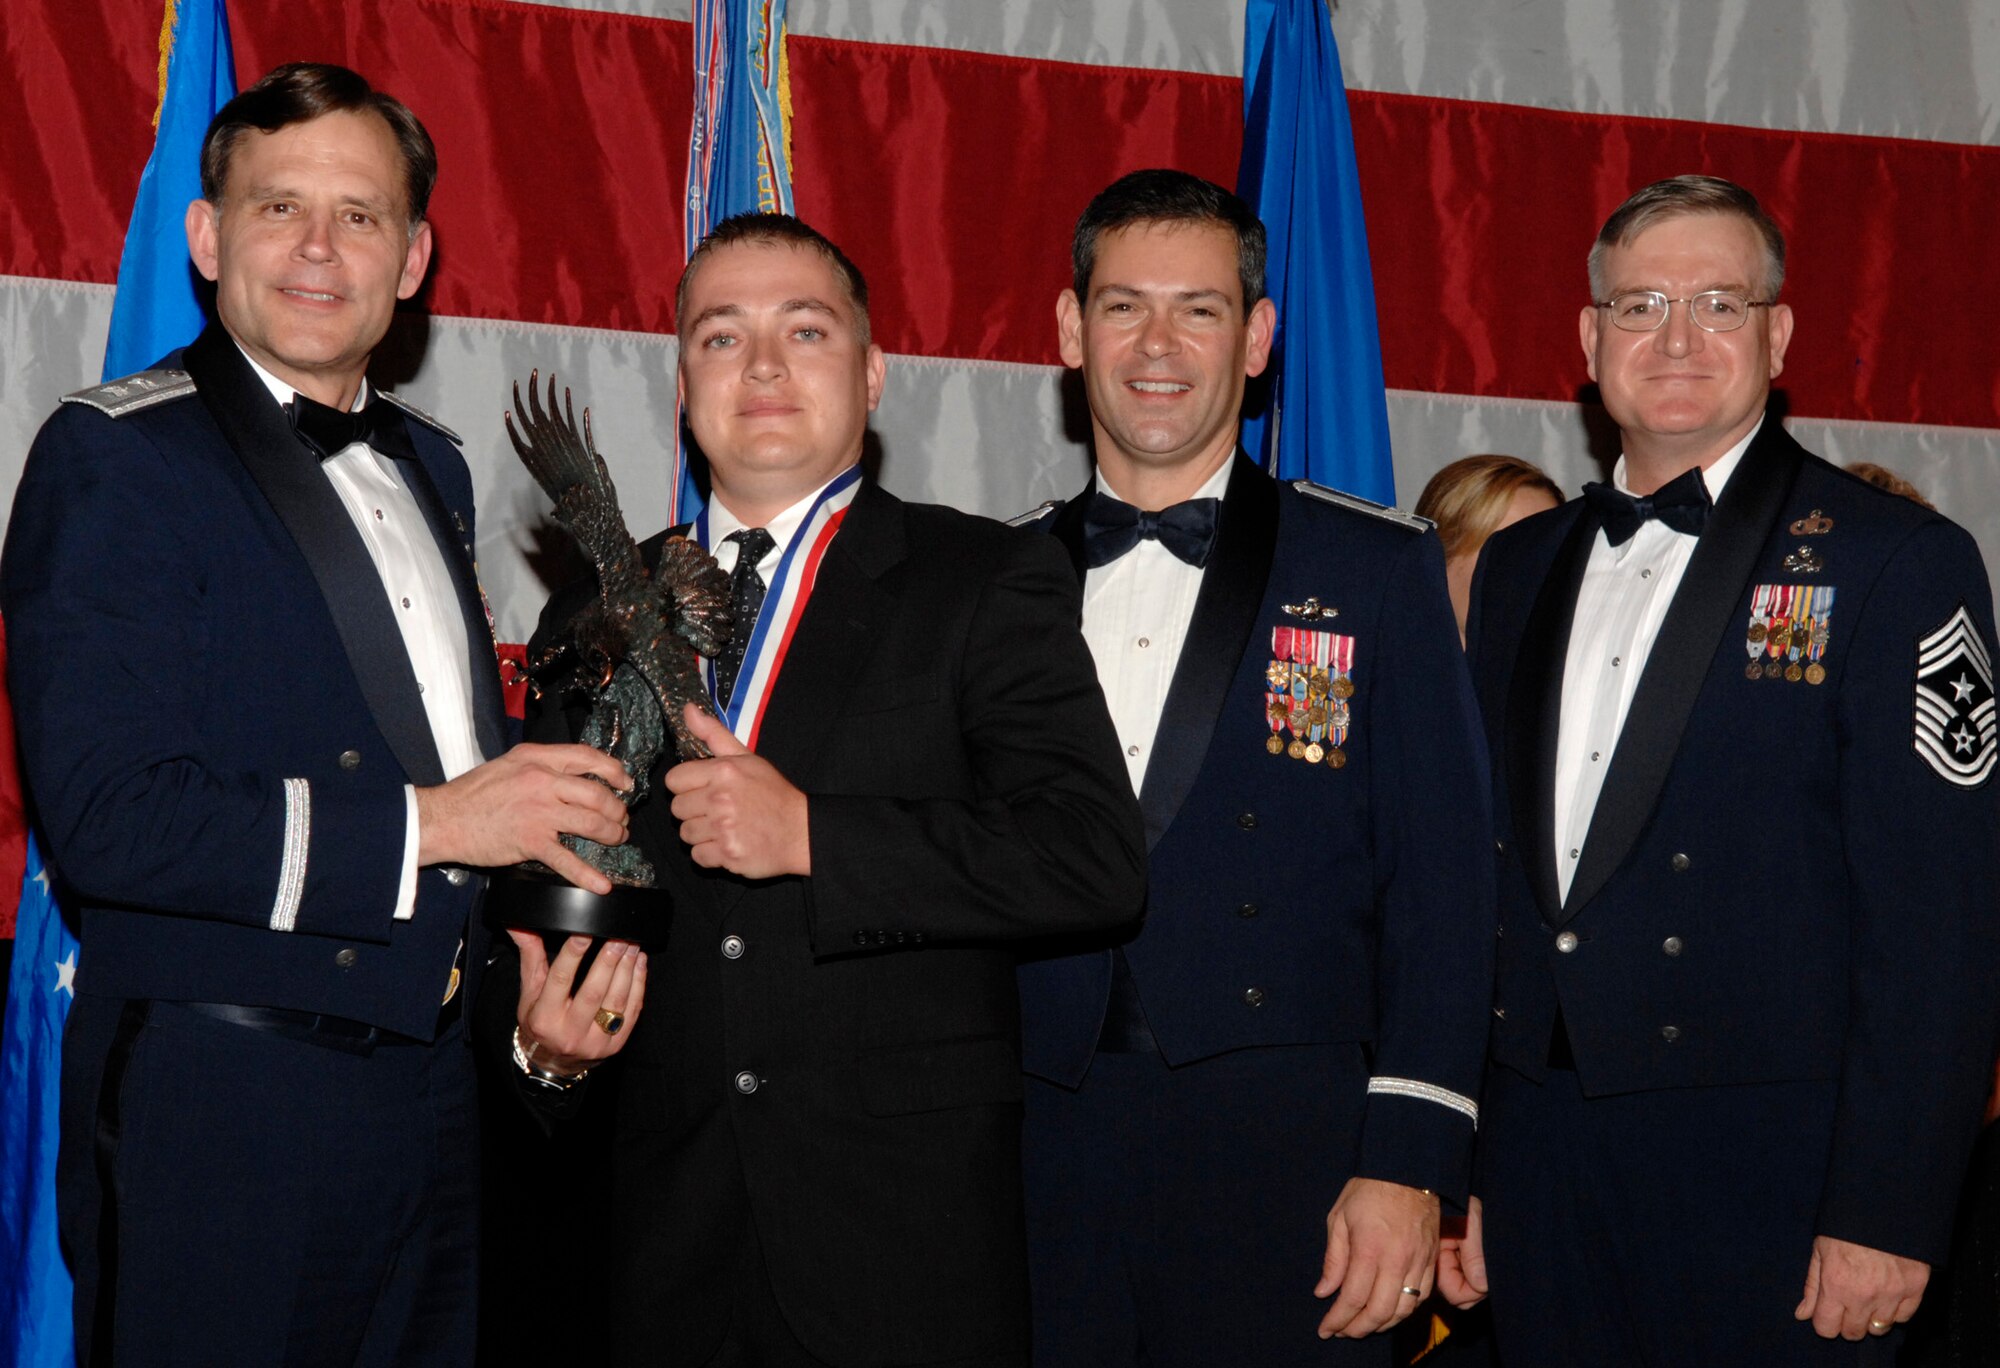 Jeno Nagy, 68th Electronic Warfare Squadron won the 53d Wing Category 4 Civilian of the Year Award during the annual awards banquet Jan. 31at the Emerald Coast Conference Center.  The night’s guest speaker and former 53d commander, Maj. Gen. (retired) Jack Catton (left) presented the awards. Col. Ken Wilsbach, 53d Wing commander, and Chief Master Sgt. Randy Salefske, 53d Wing command chief, also stand with the winner.  U.S. Air Force photo.